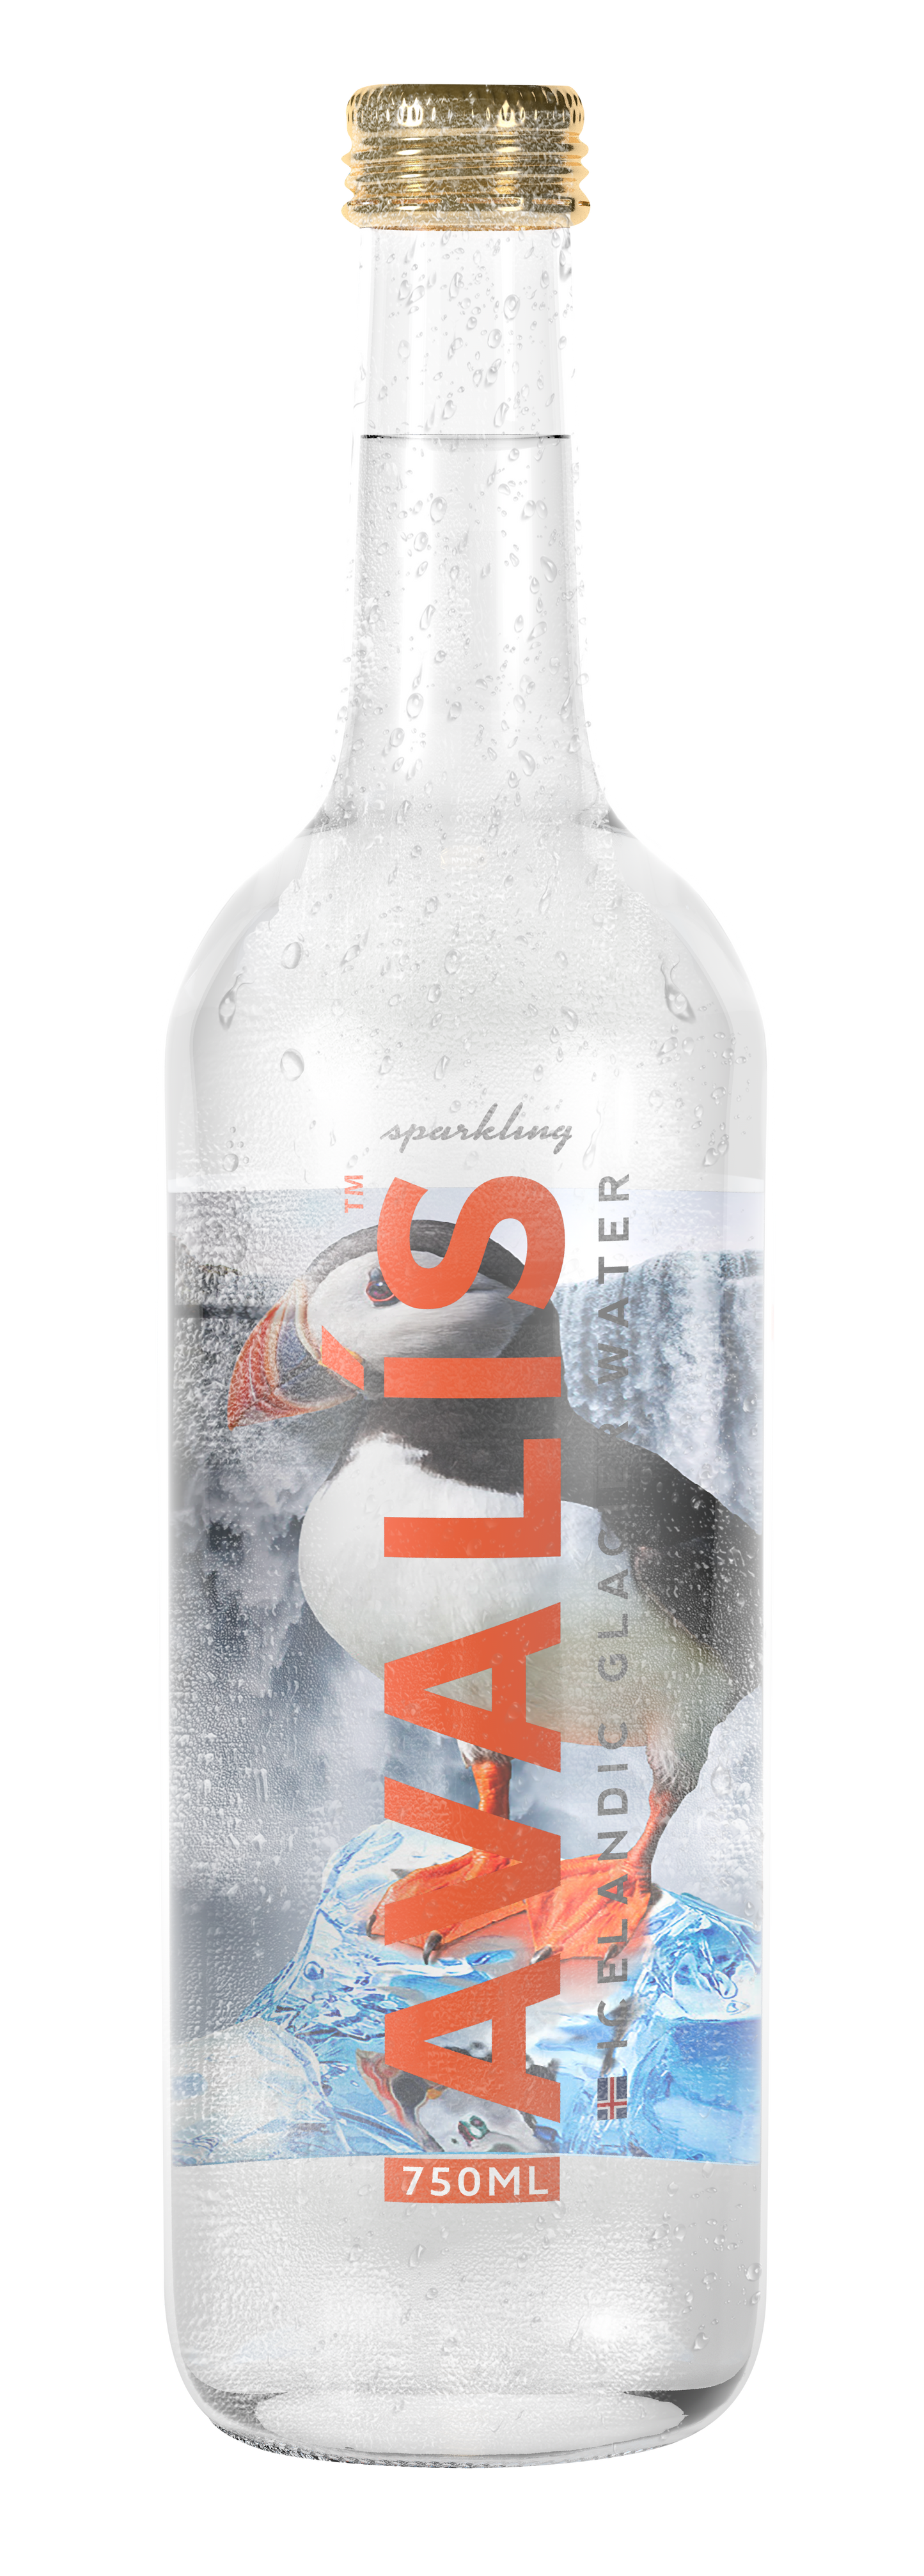 Avalis Icelandic Glacier water - A case of 12 Sparkling x 750ml Glass Bottles